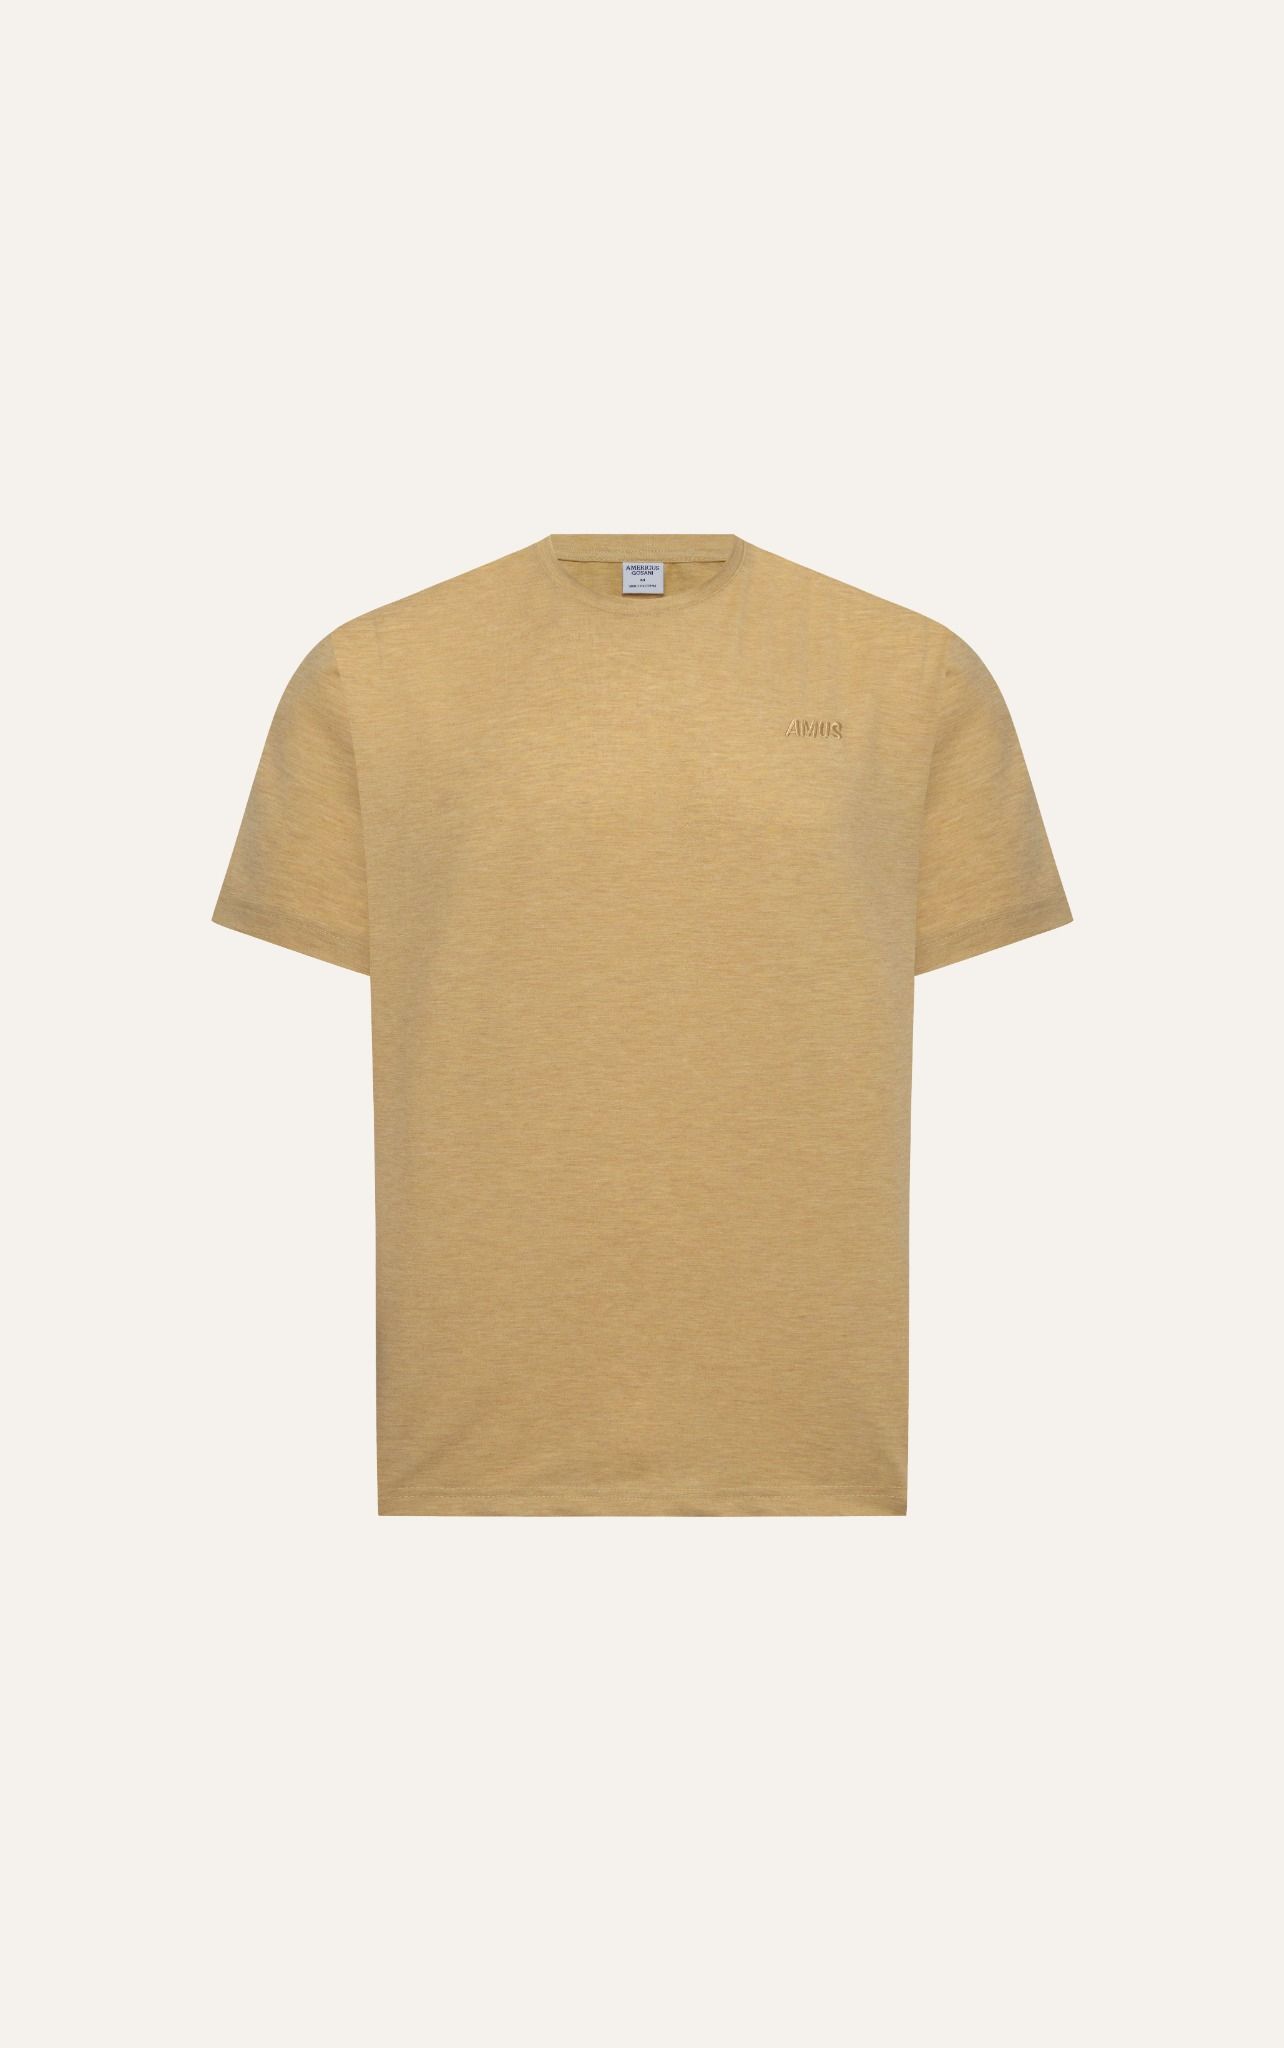  AG60 FACTORY REGULAR FIT EMBROIDERED "AMUS" T-SHIRT - YELLOW 